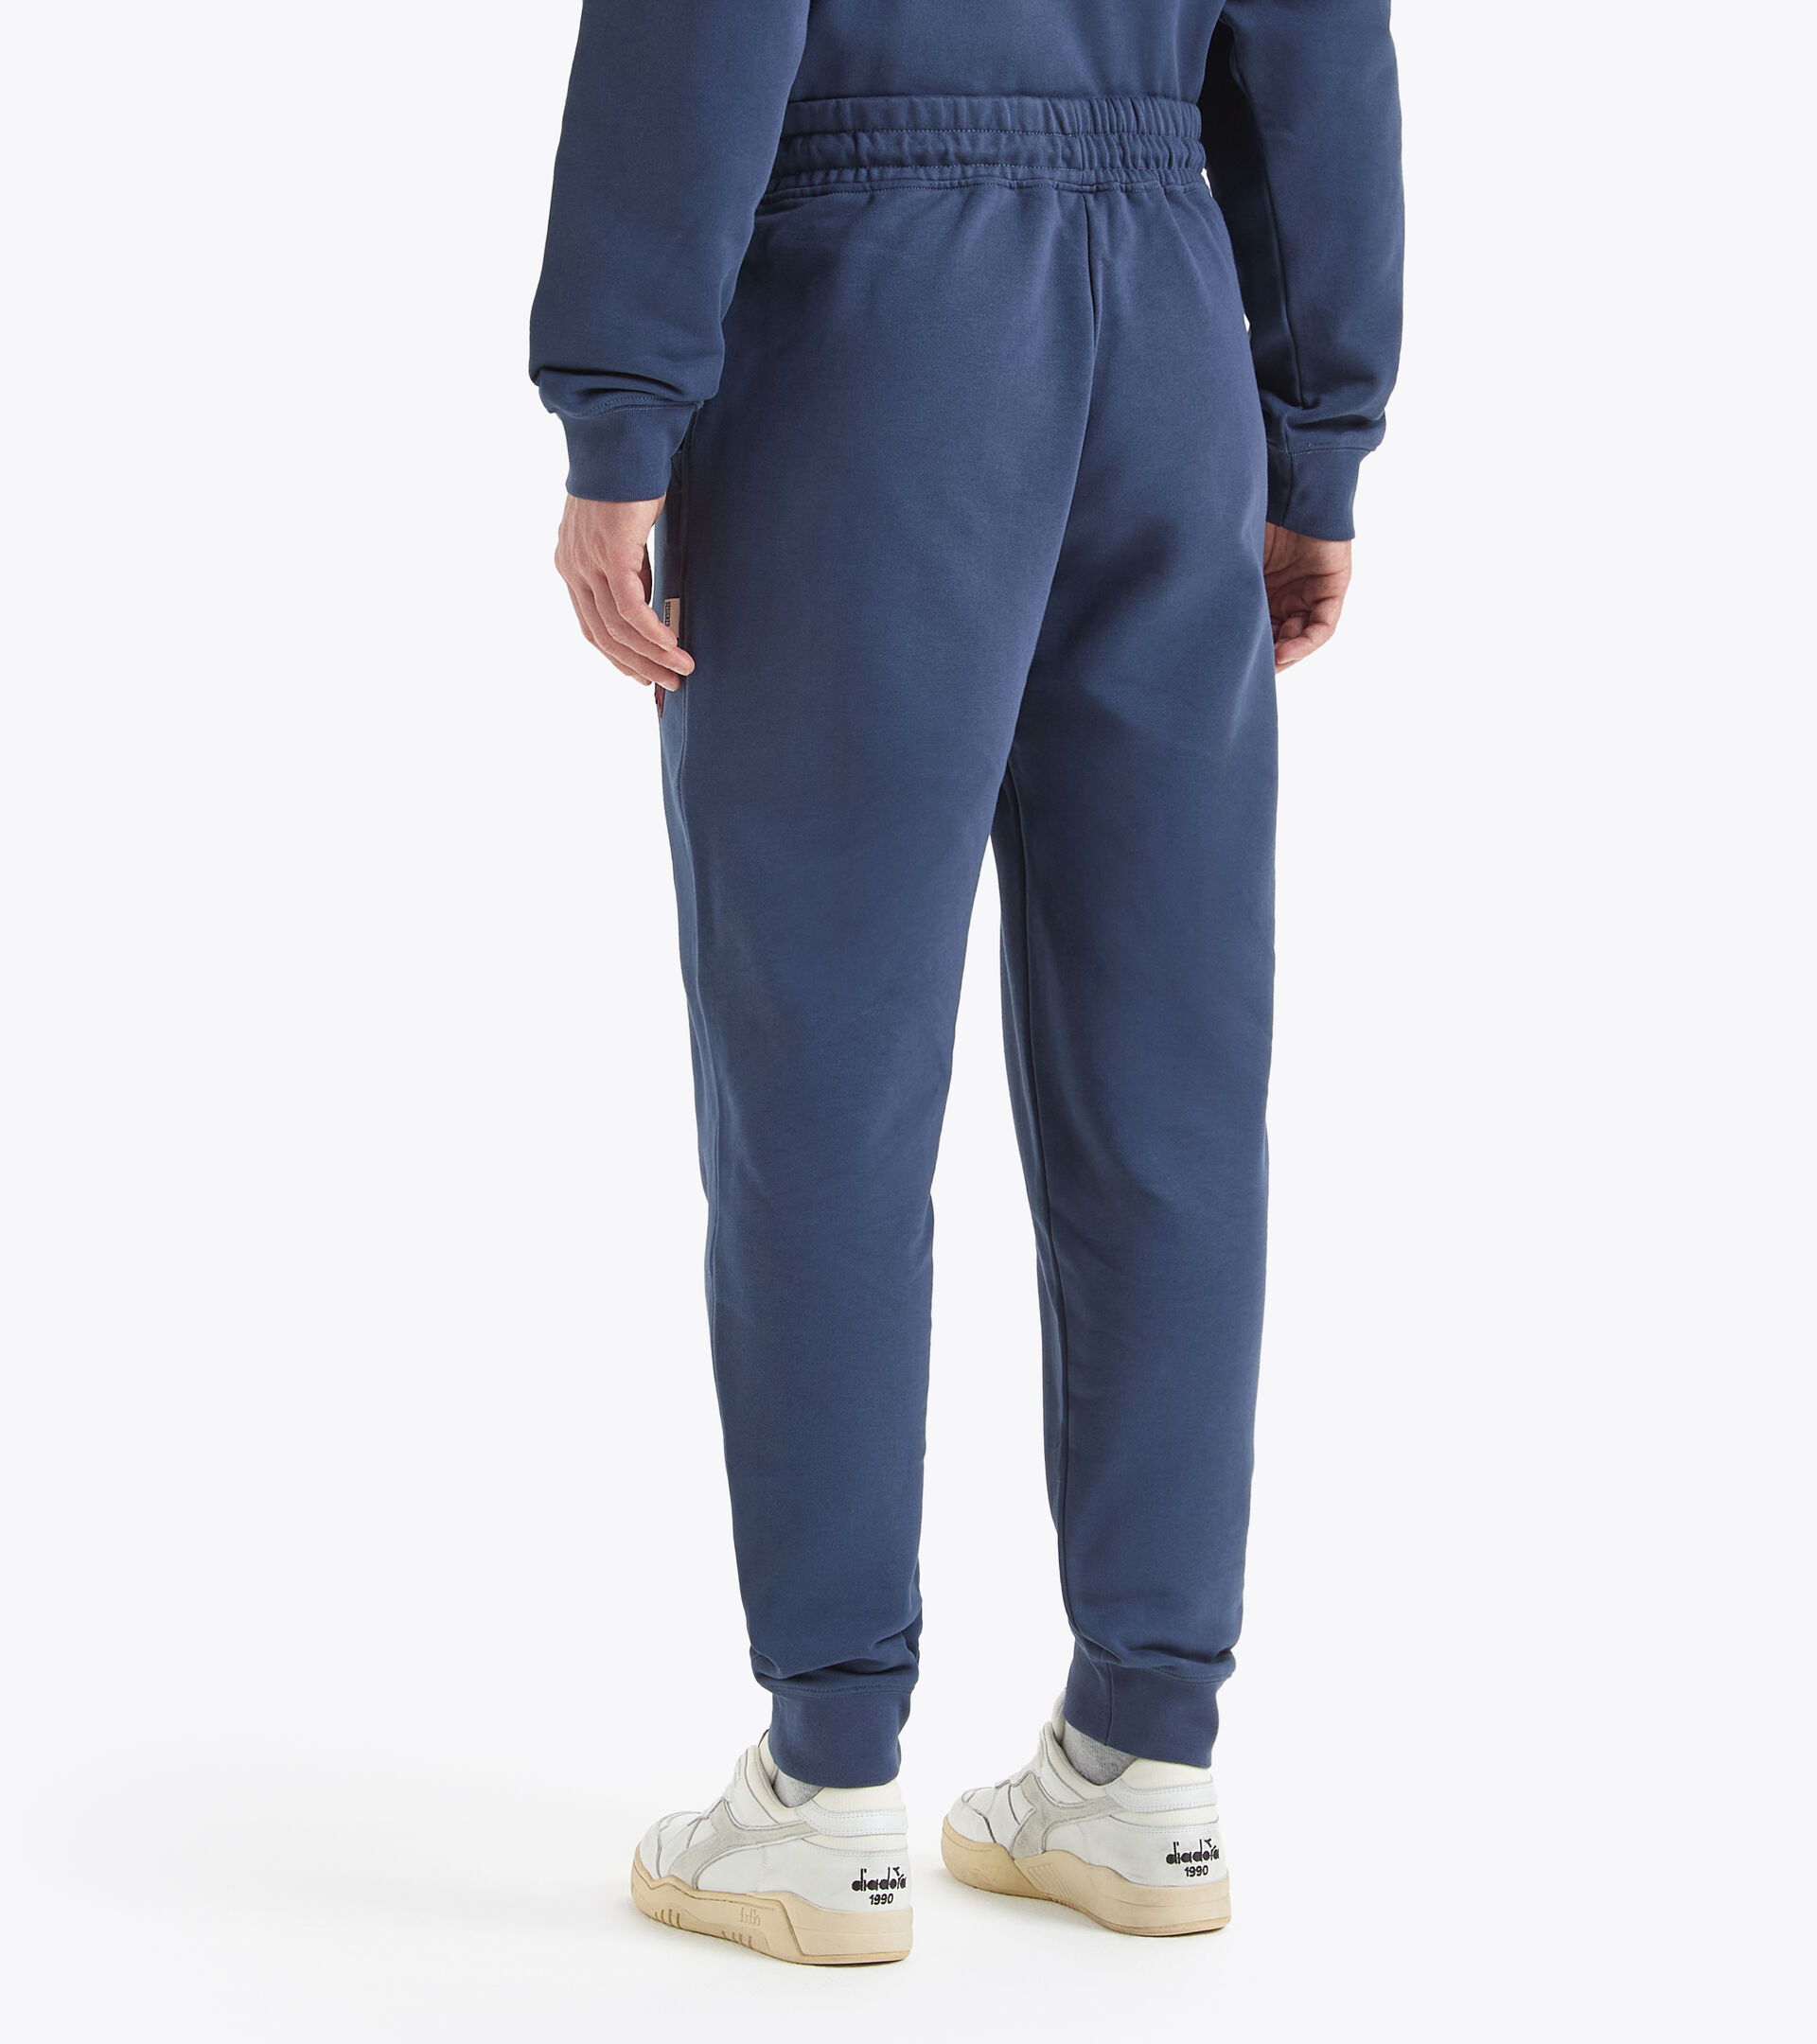 Jogginghose aus recycelter Baumwolle - Made in Italy - Gender Neutral JOGGER PANT LEGACY OCEANA - Diadora